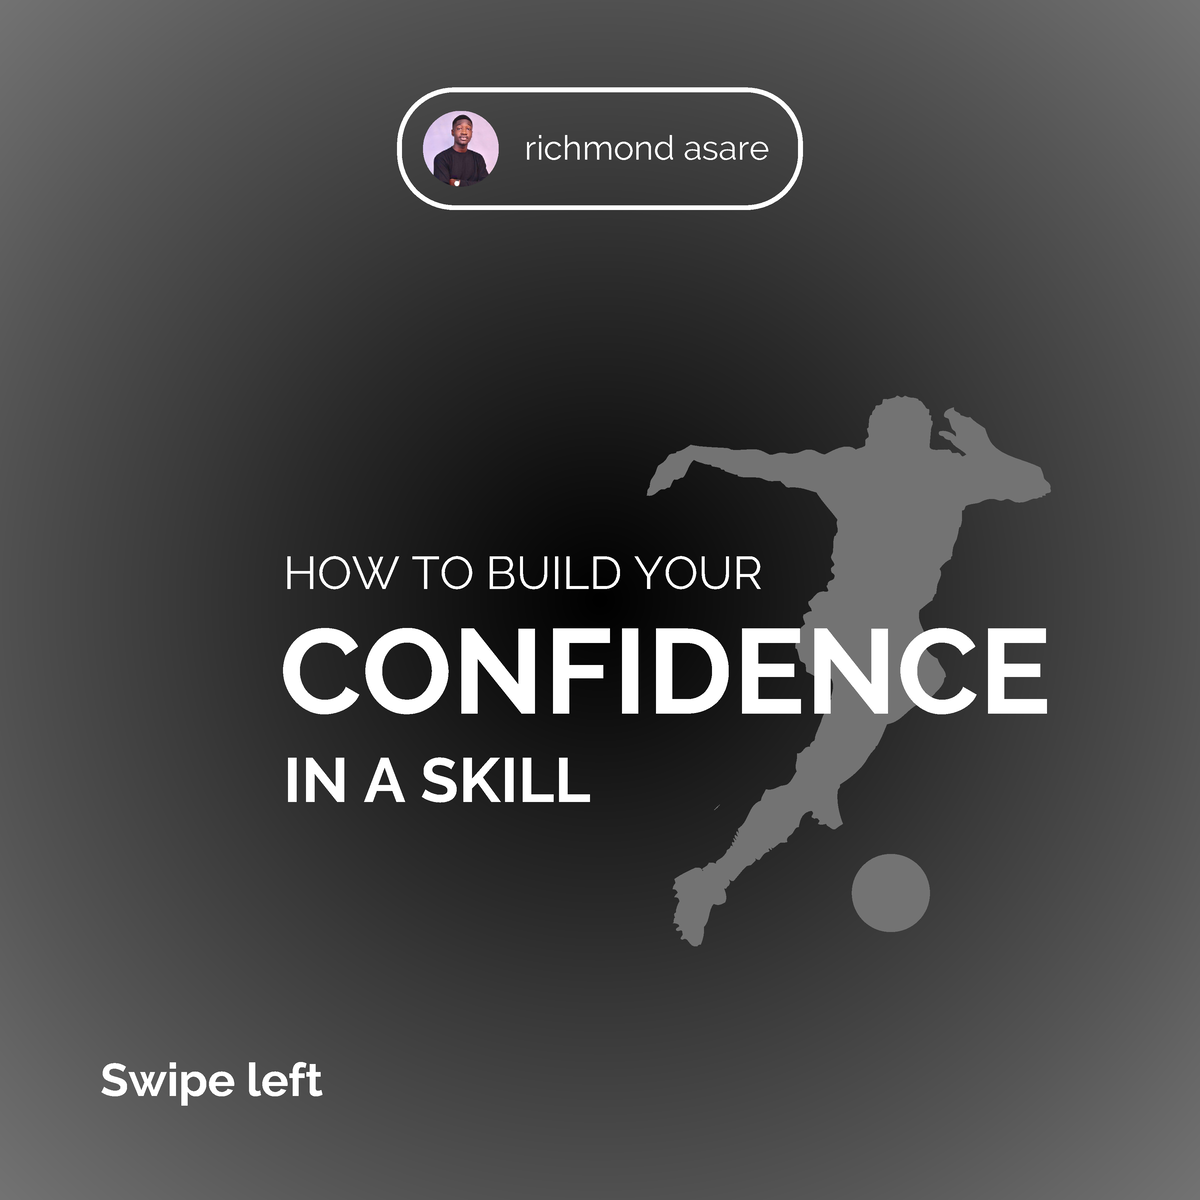 How To Build Confidence In Your Skill 1683639238 Confidence How To Build Your In A Skill 7771